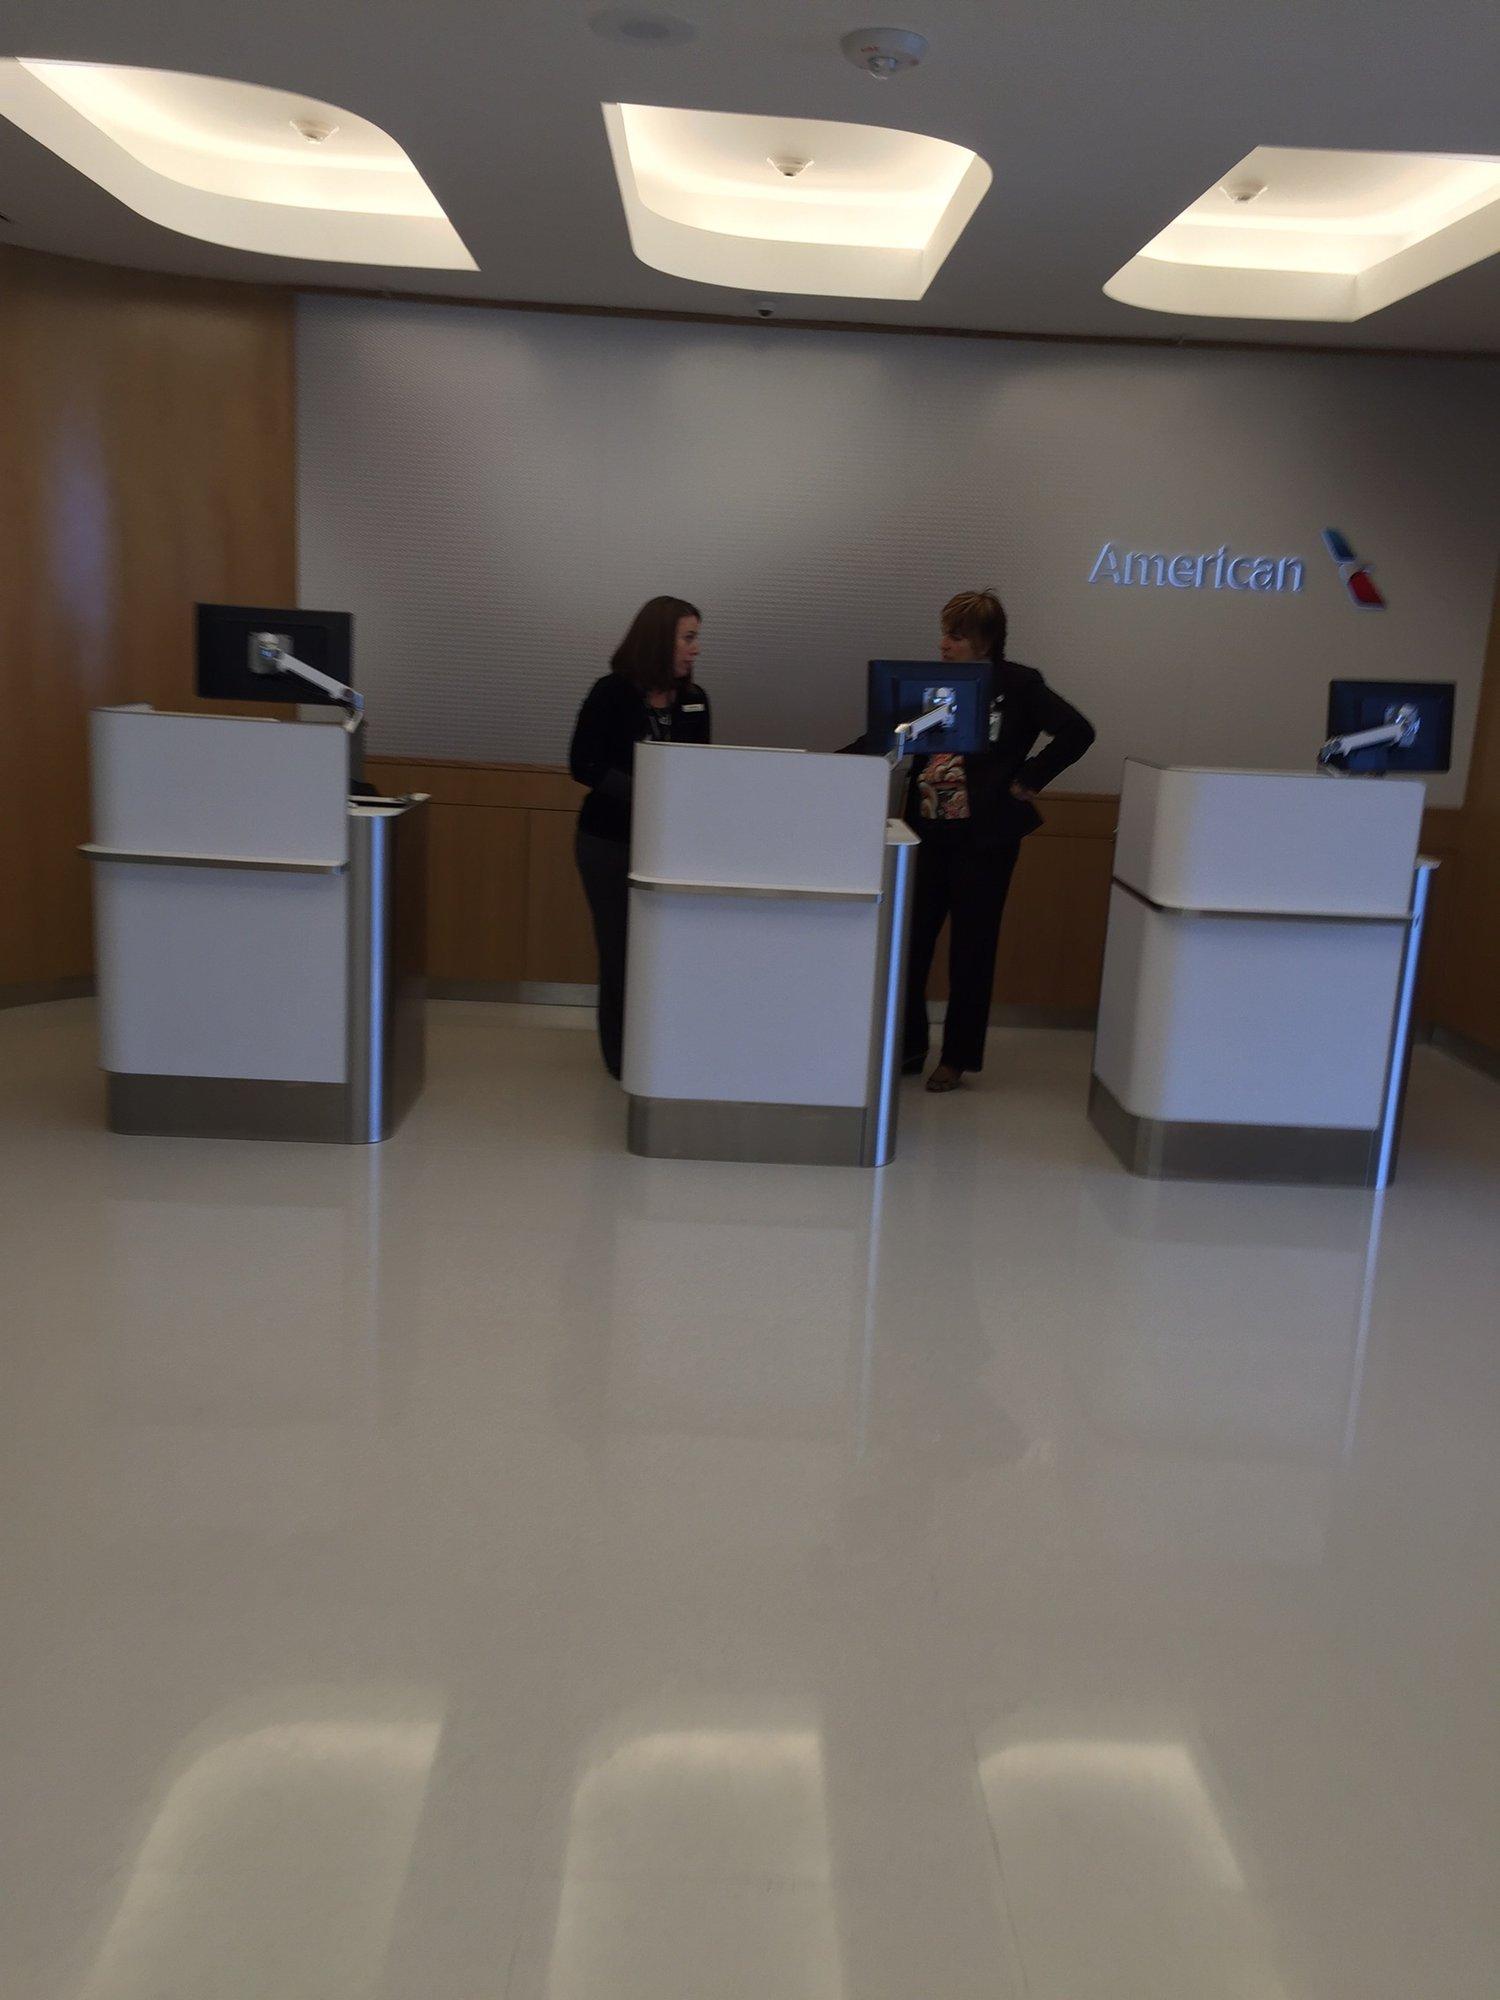 American Airlines Admirals Club (Gate D15) image 25 of 25